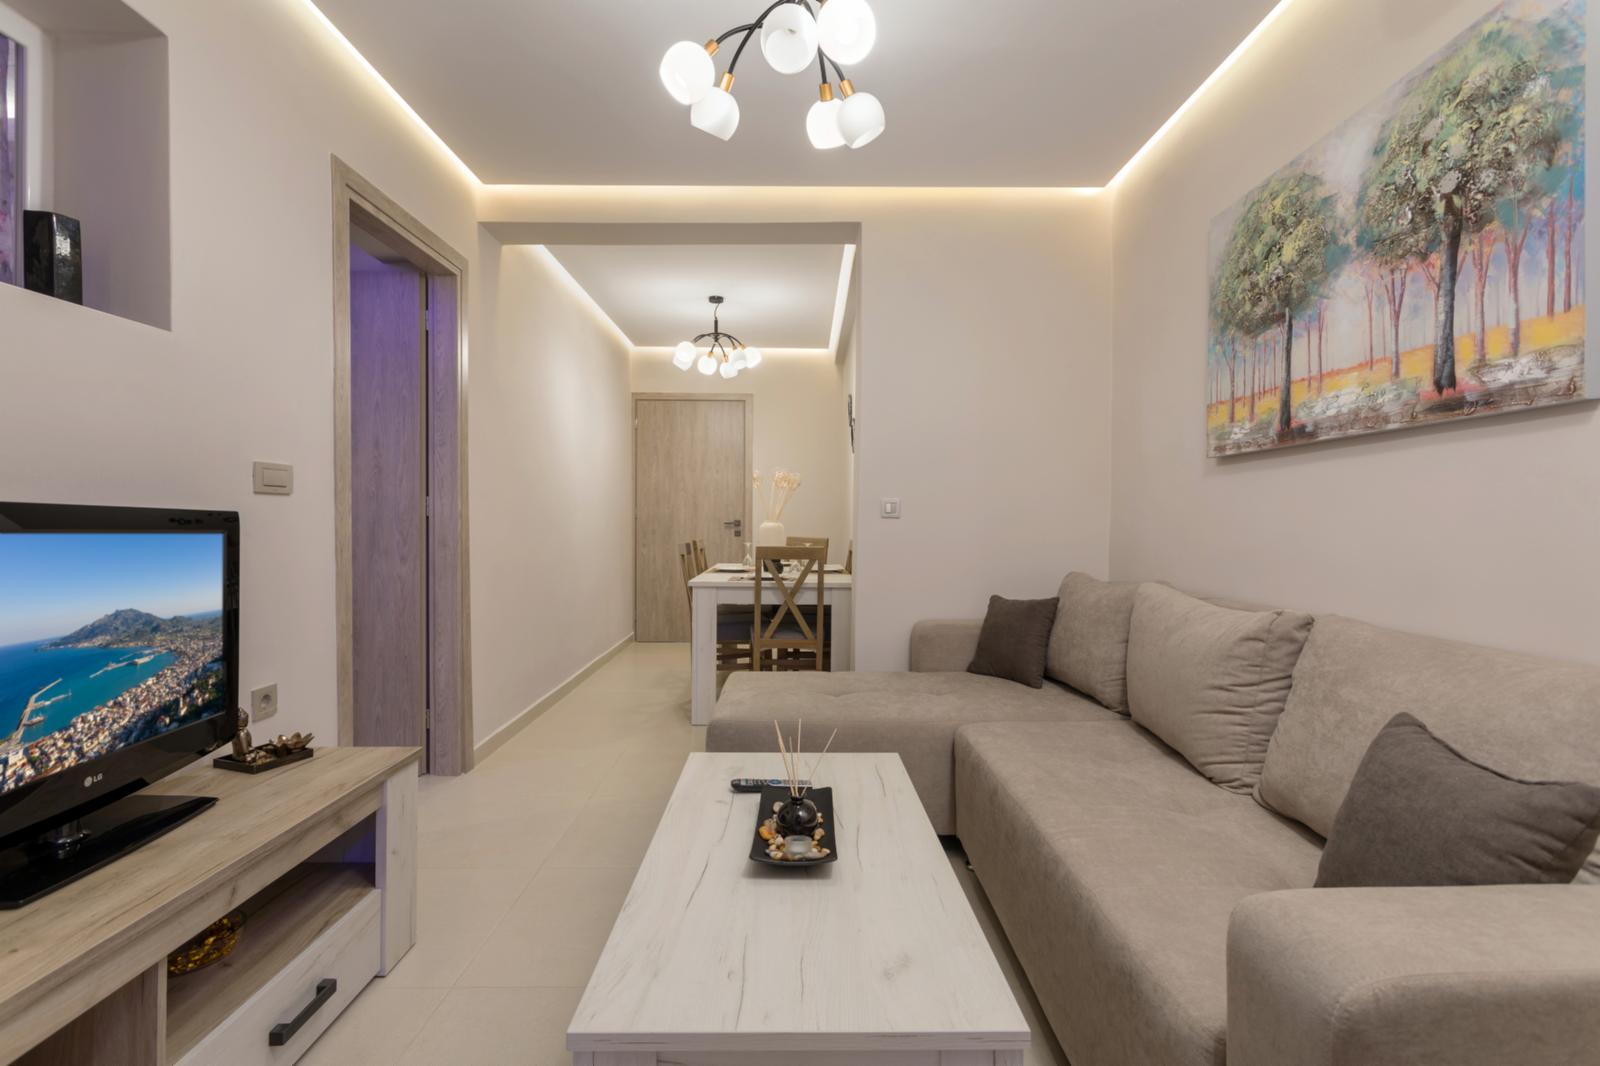 Property Image 1 - Evia’s Apartment - New Apartment In Town!